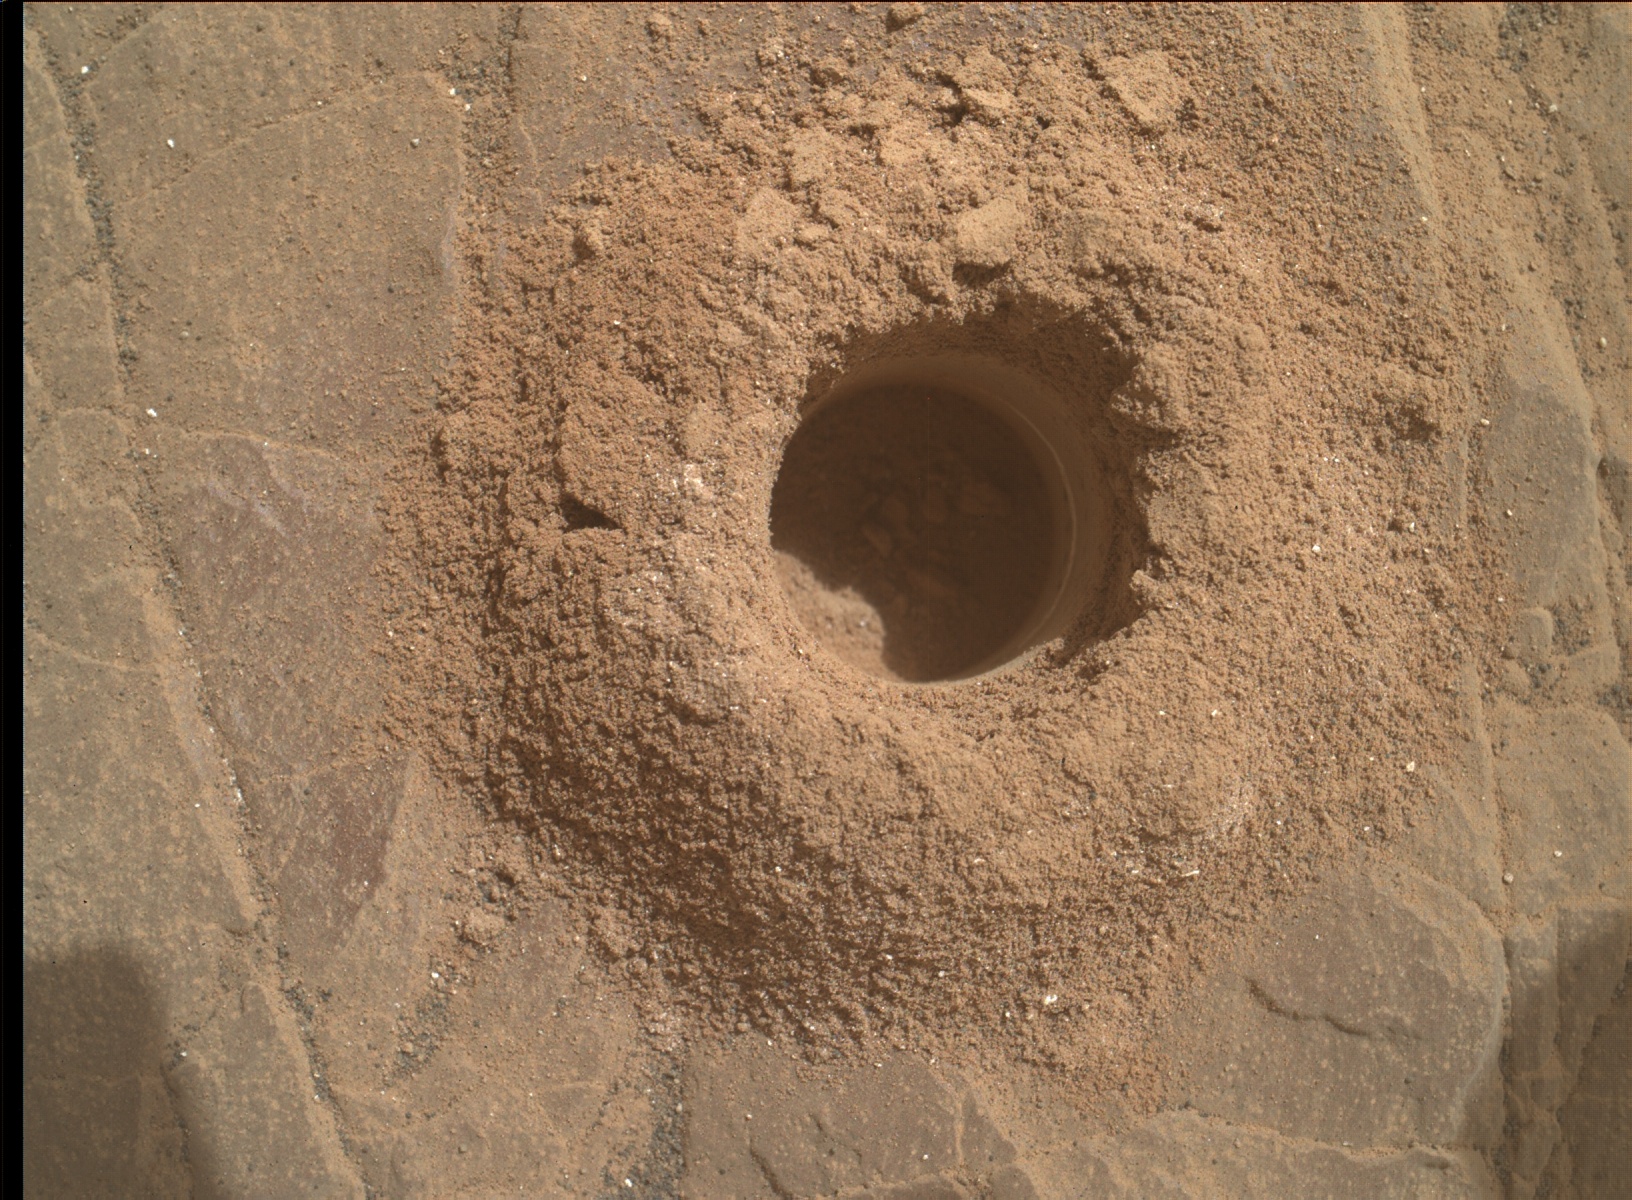 Nasa's Mars rover Curiosity acquired this image using its Mars Hand Lens Imager (MAHLI) on Sol 2378